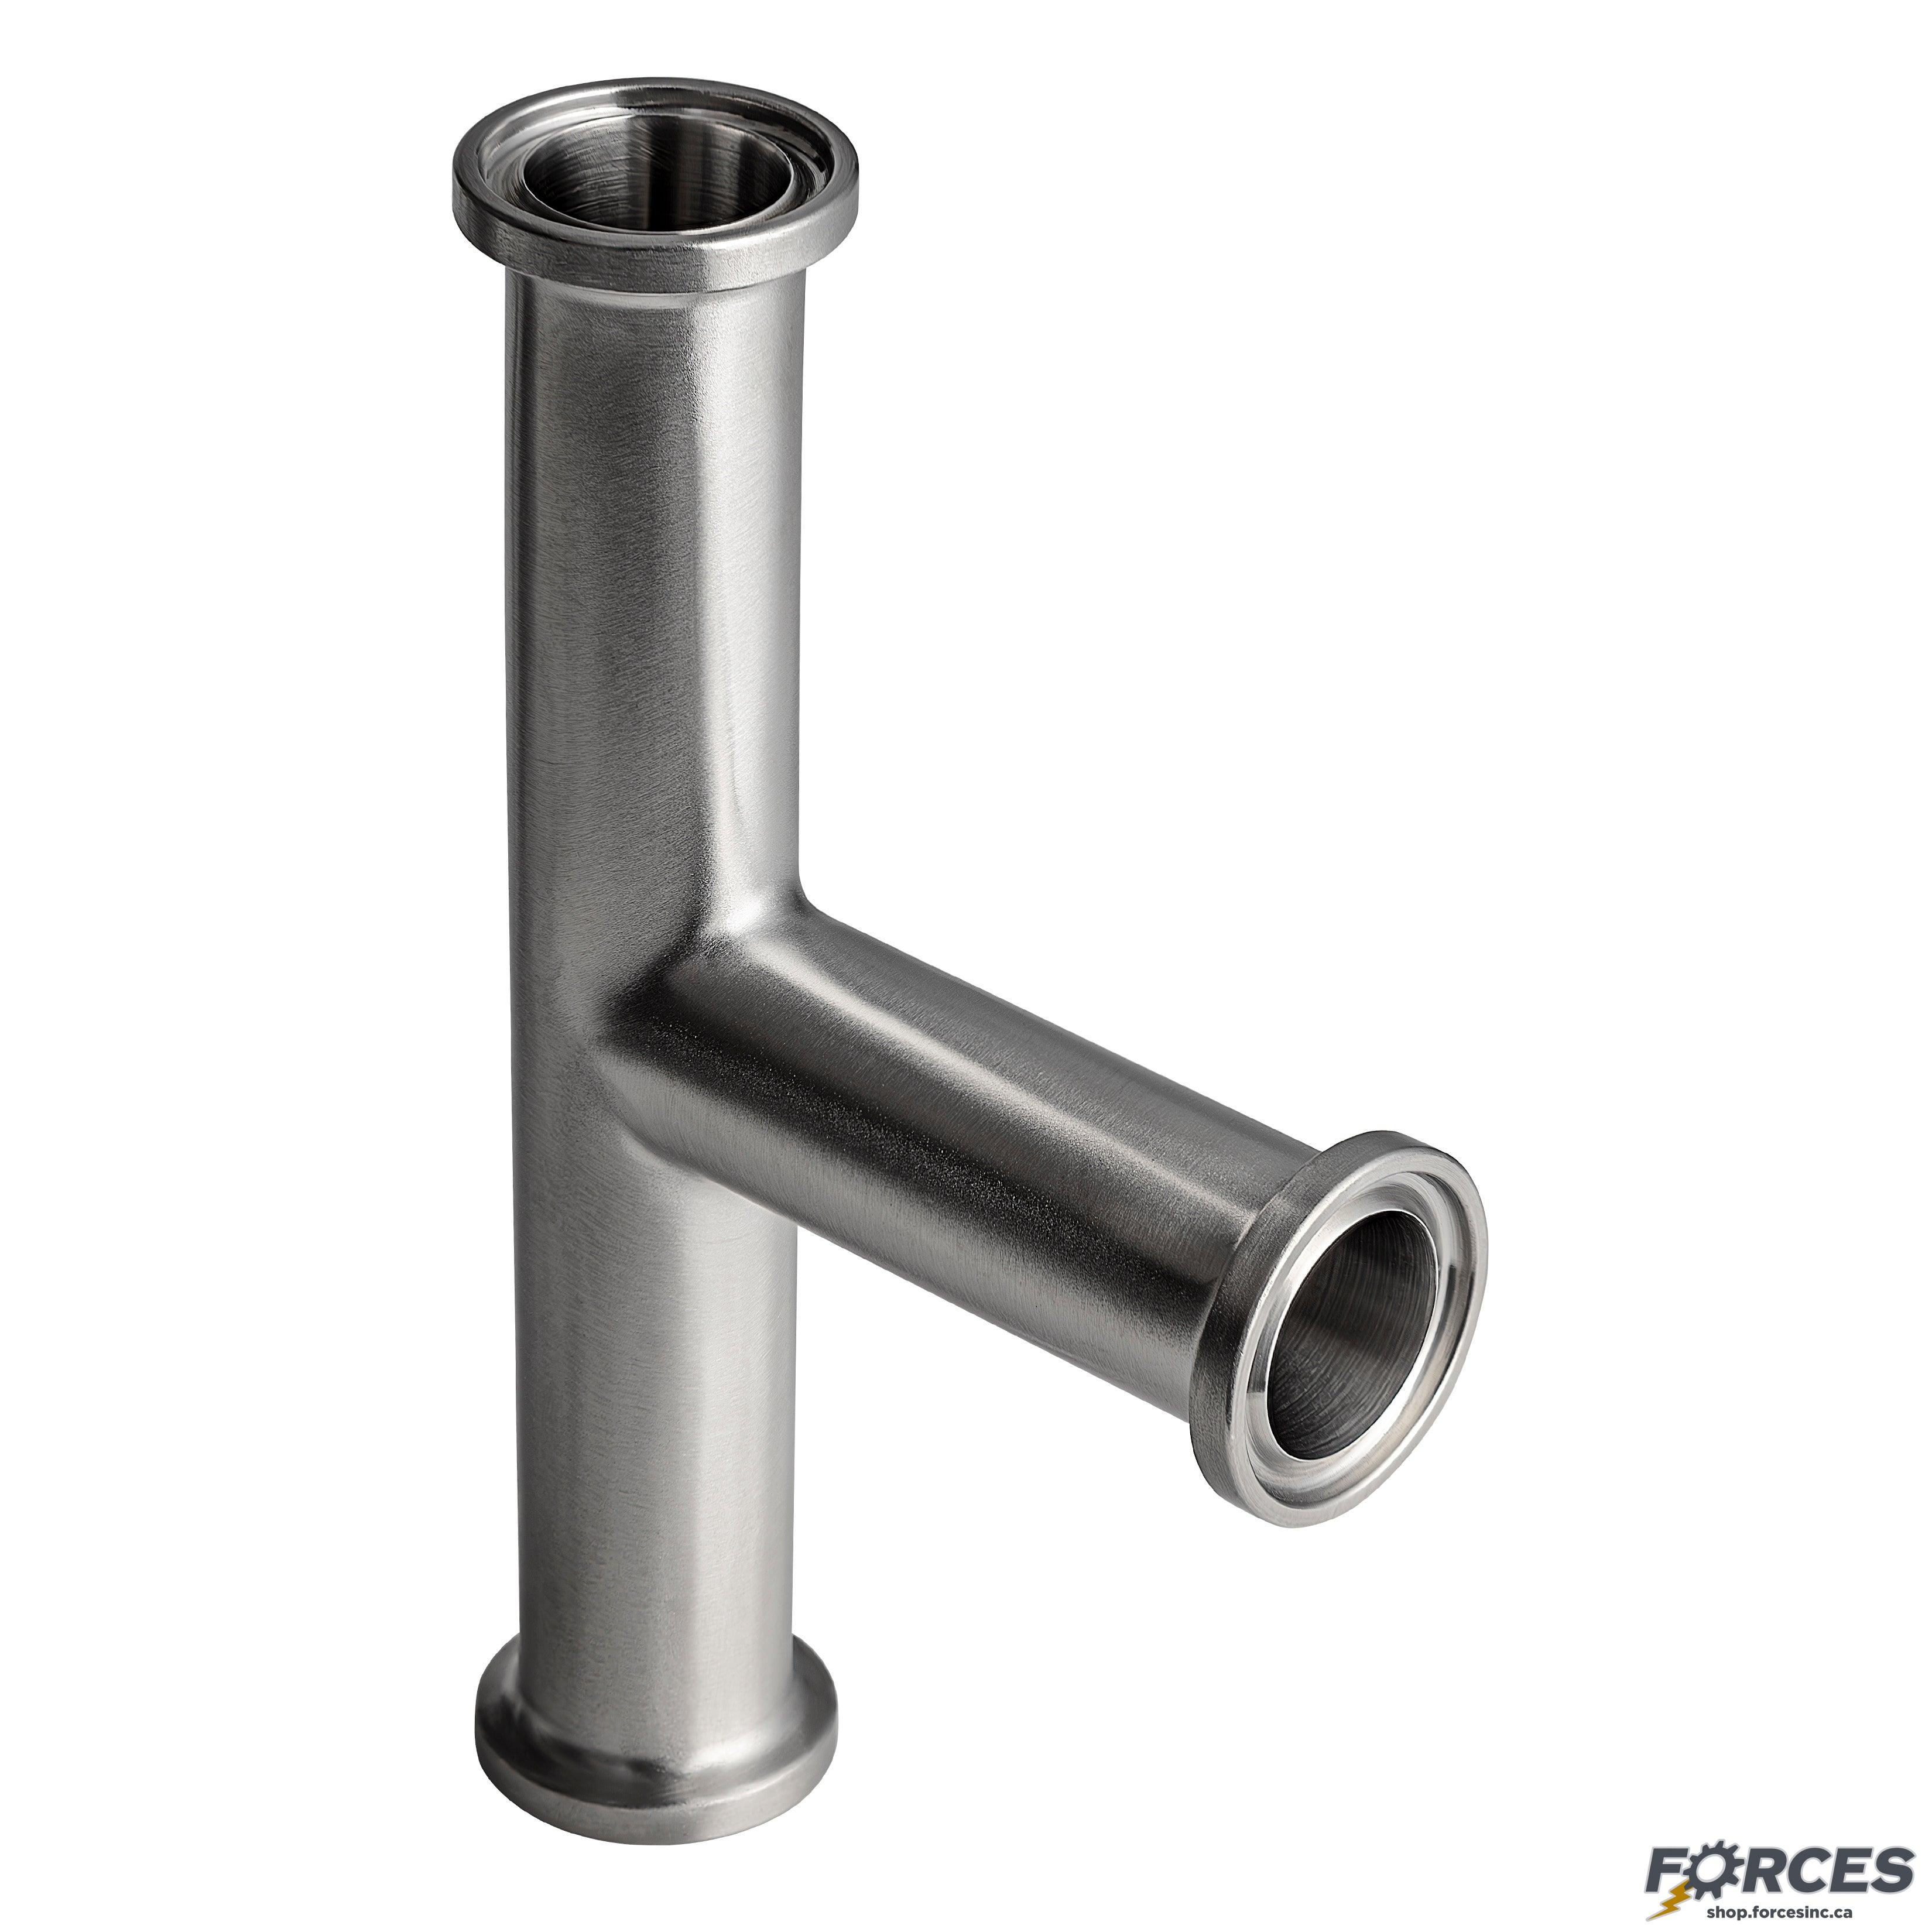 1" Tri-Clamp Tee - Stainless Steel 304 - Forces Inc